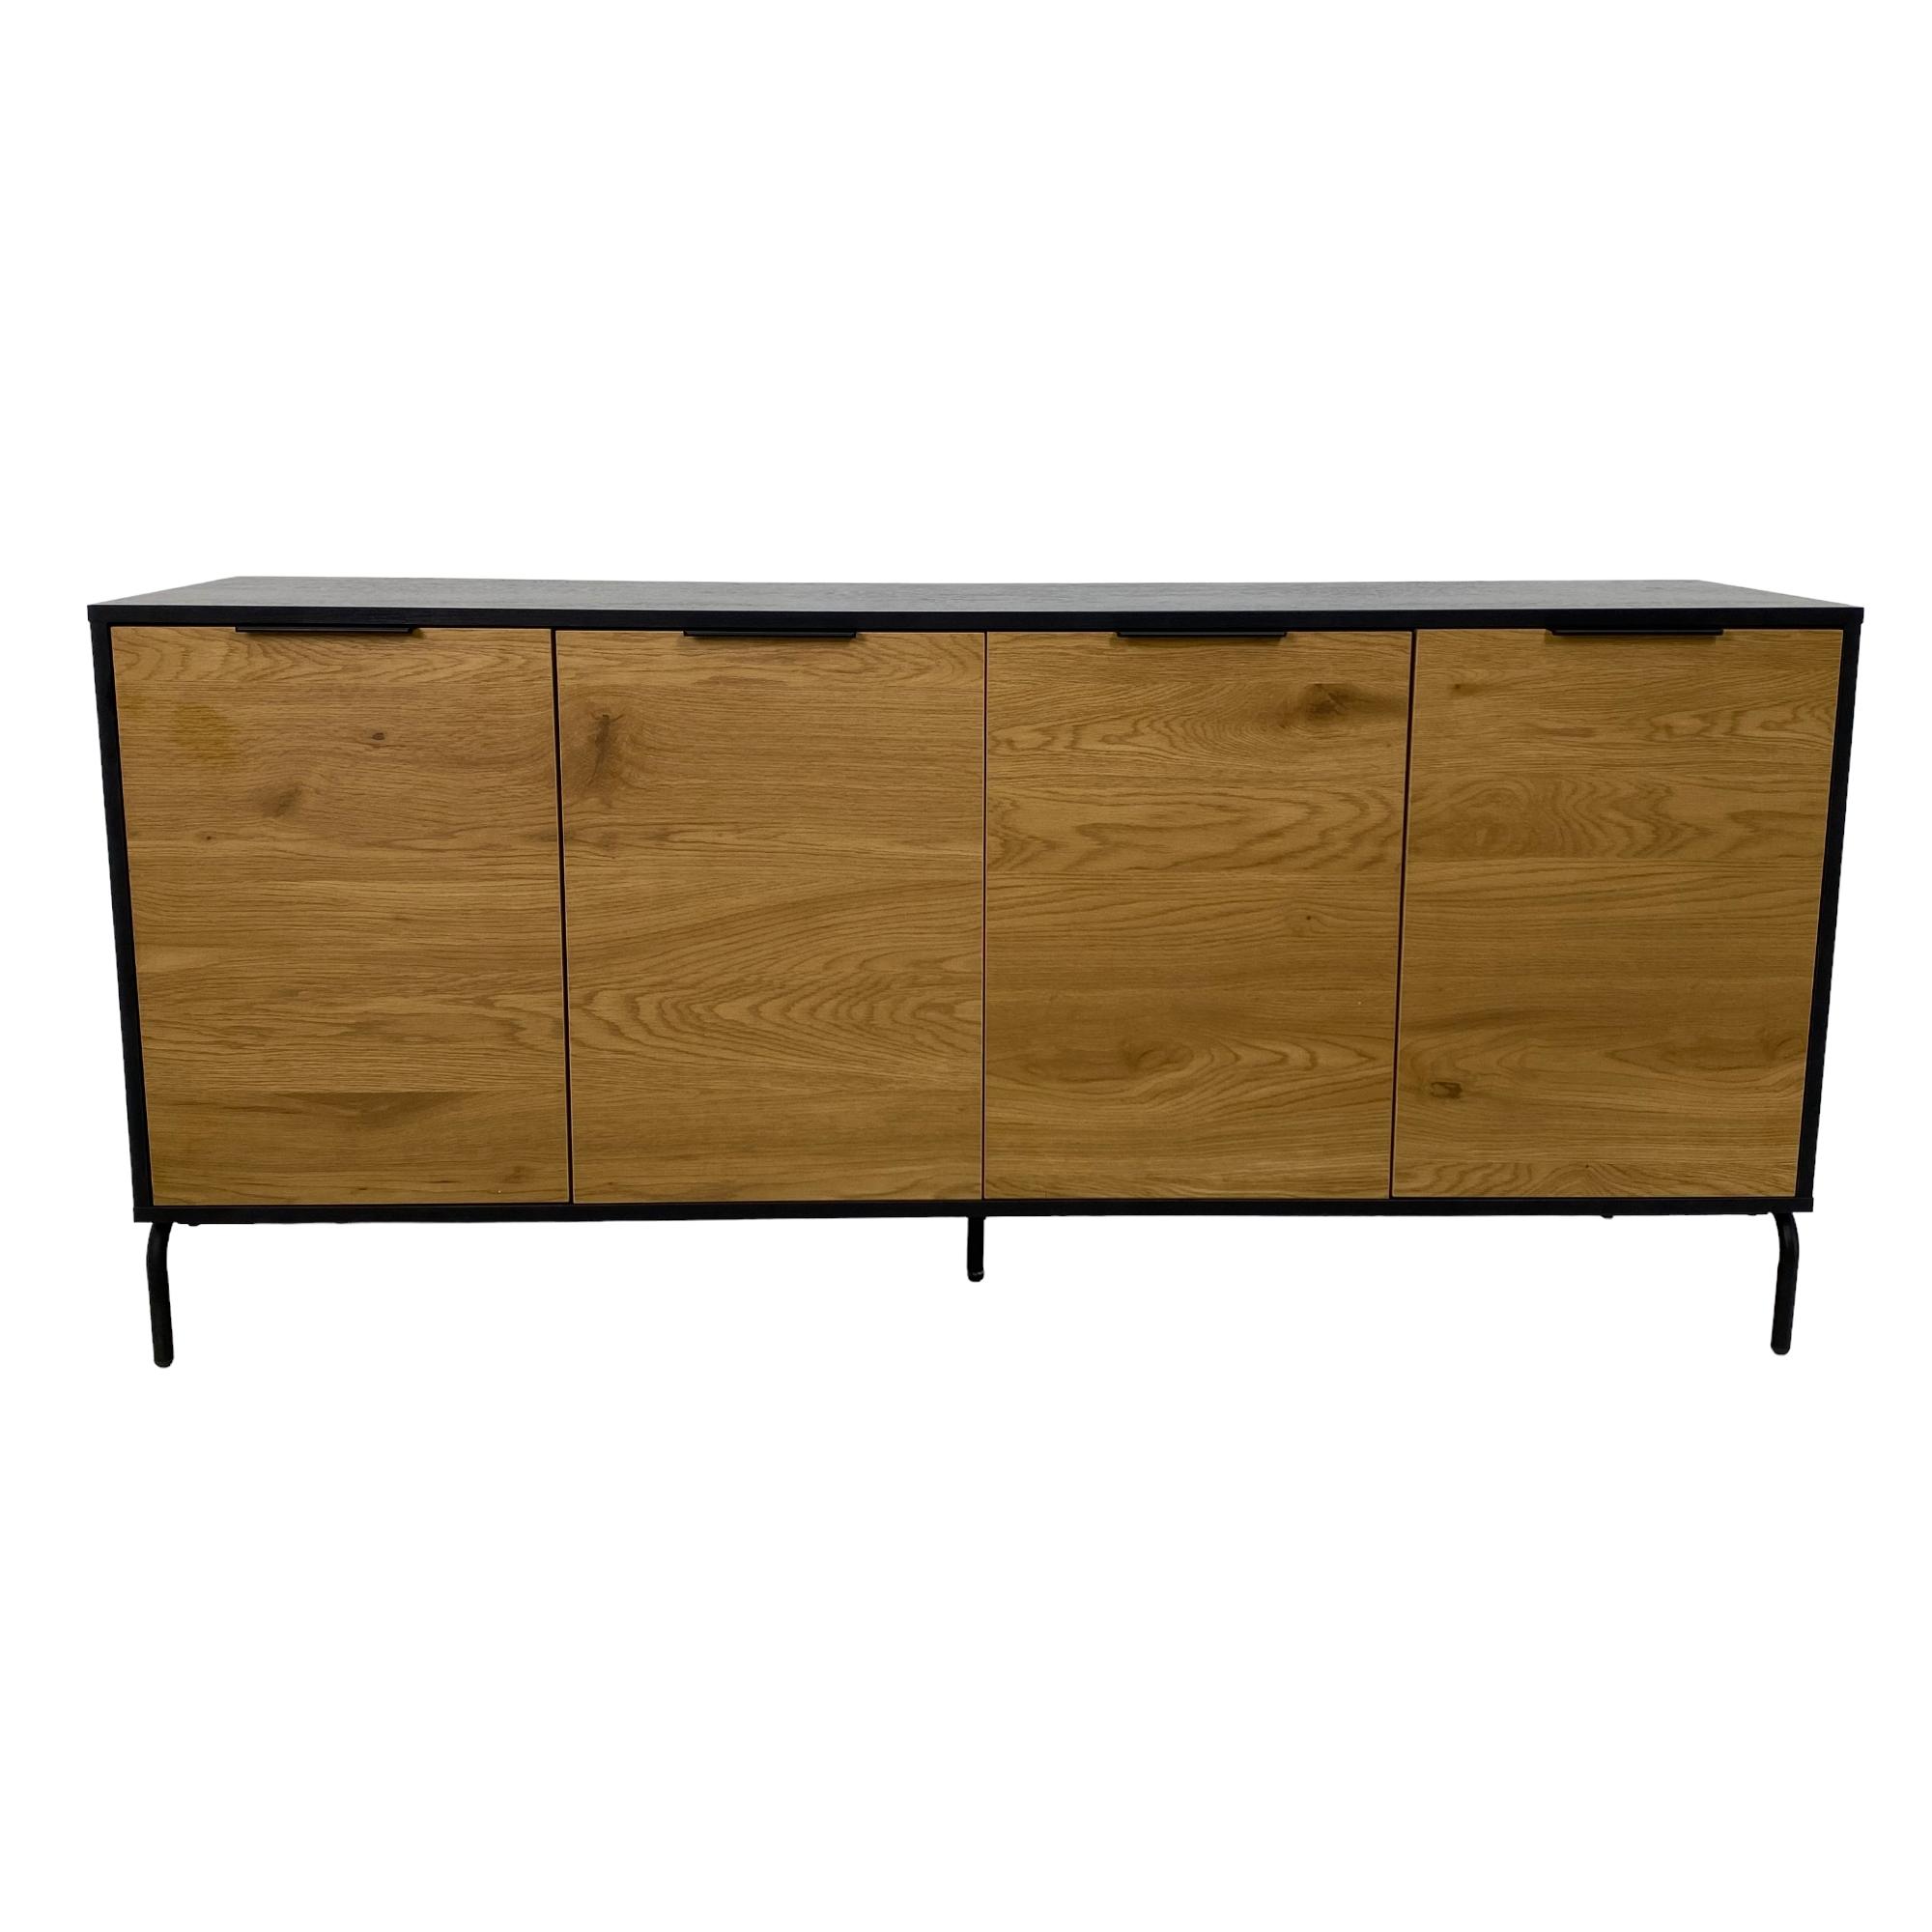 CABINET FOR TV (ABOUT) 40X165X75C - 532-52034AA